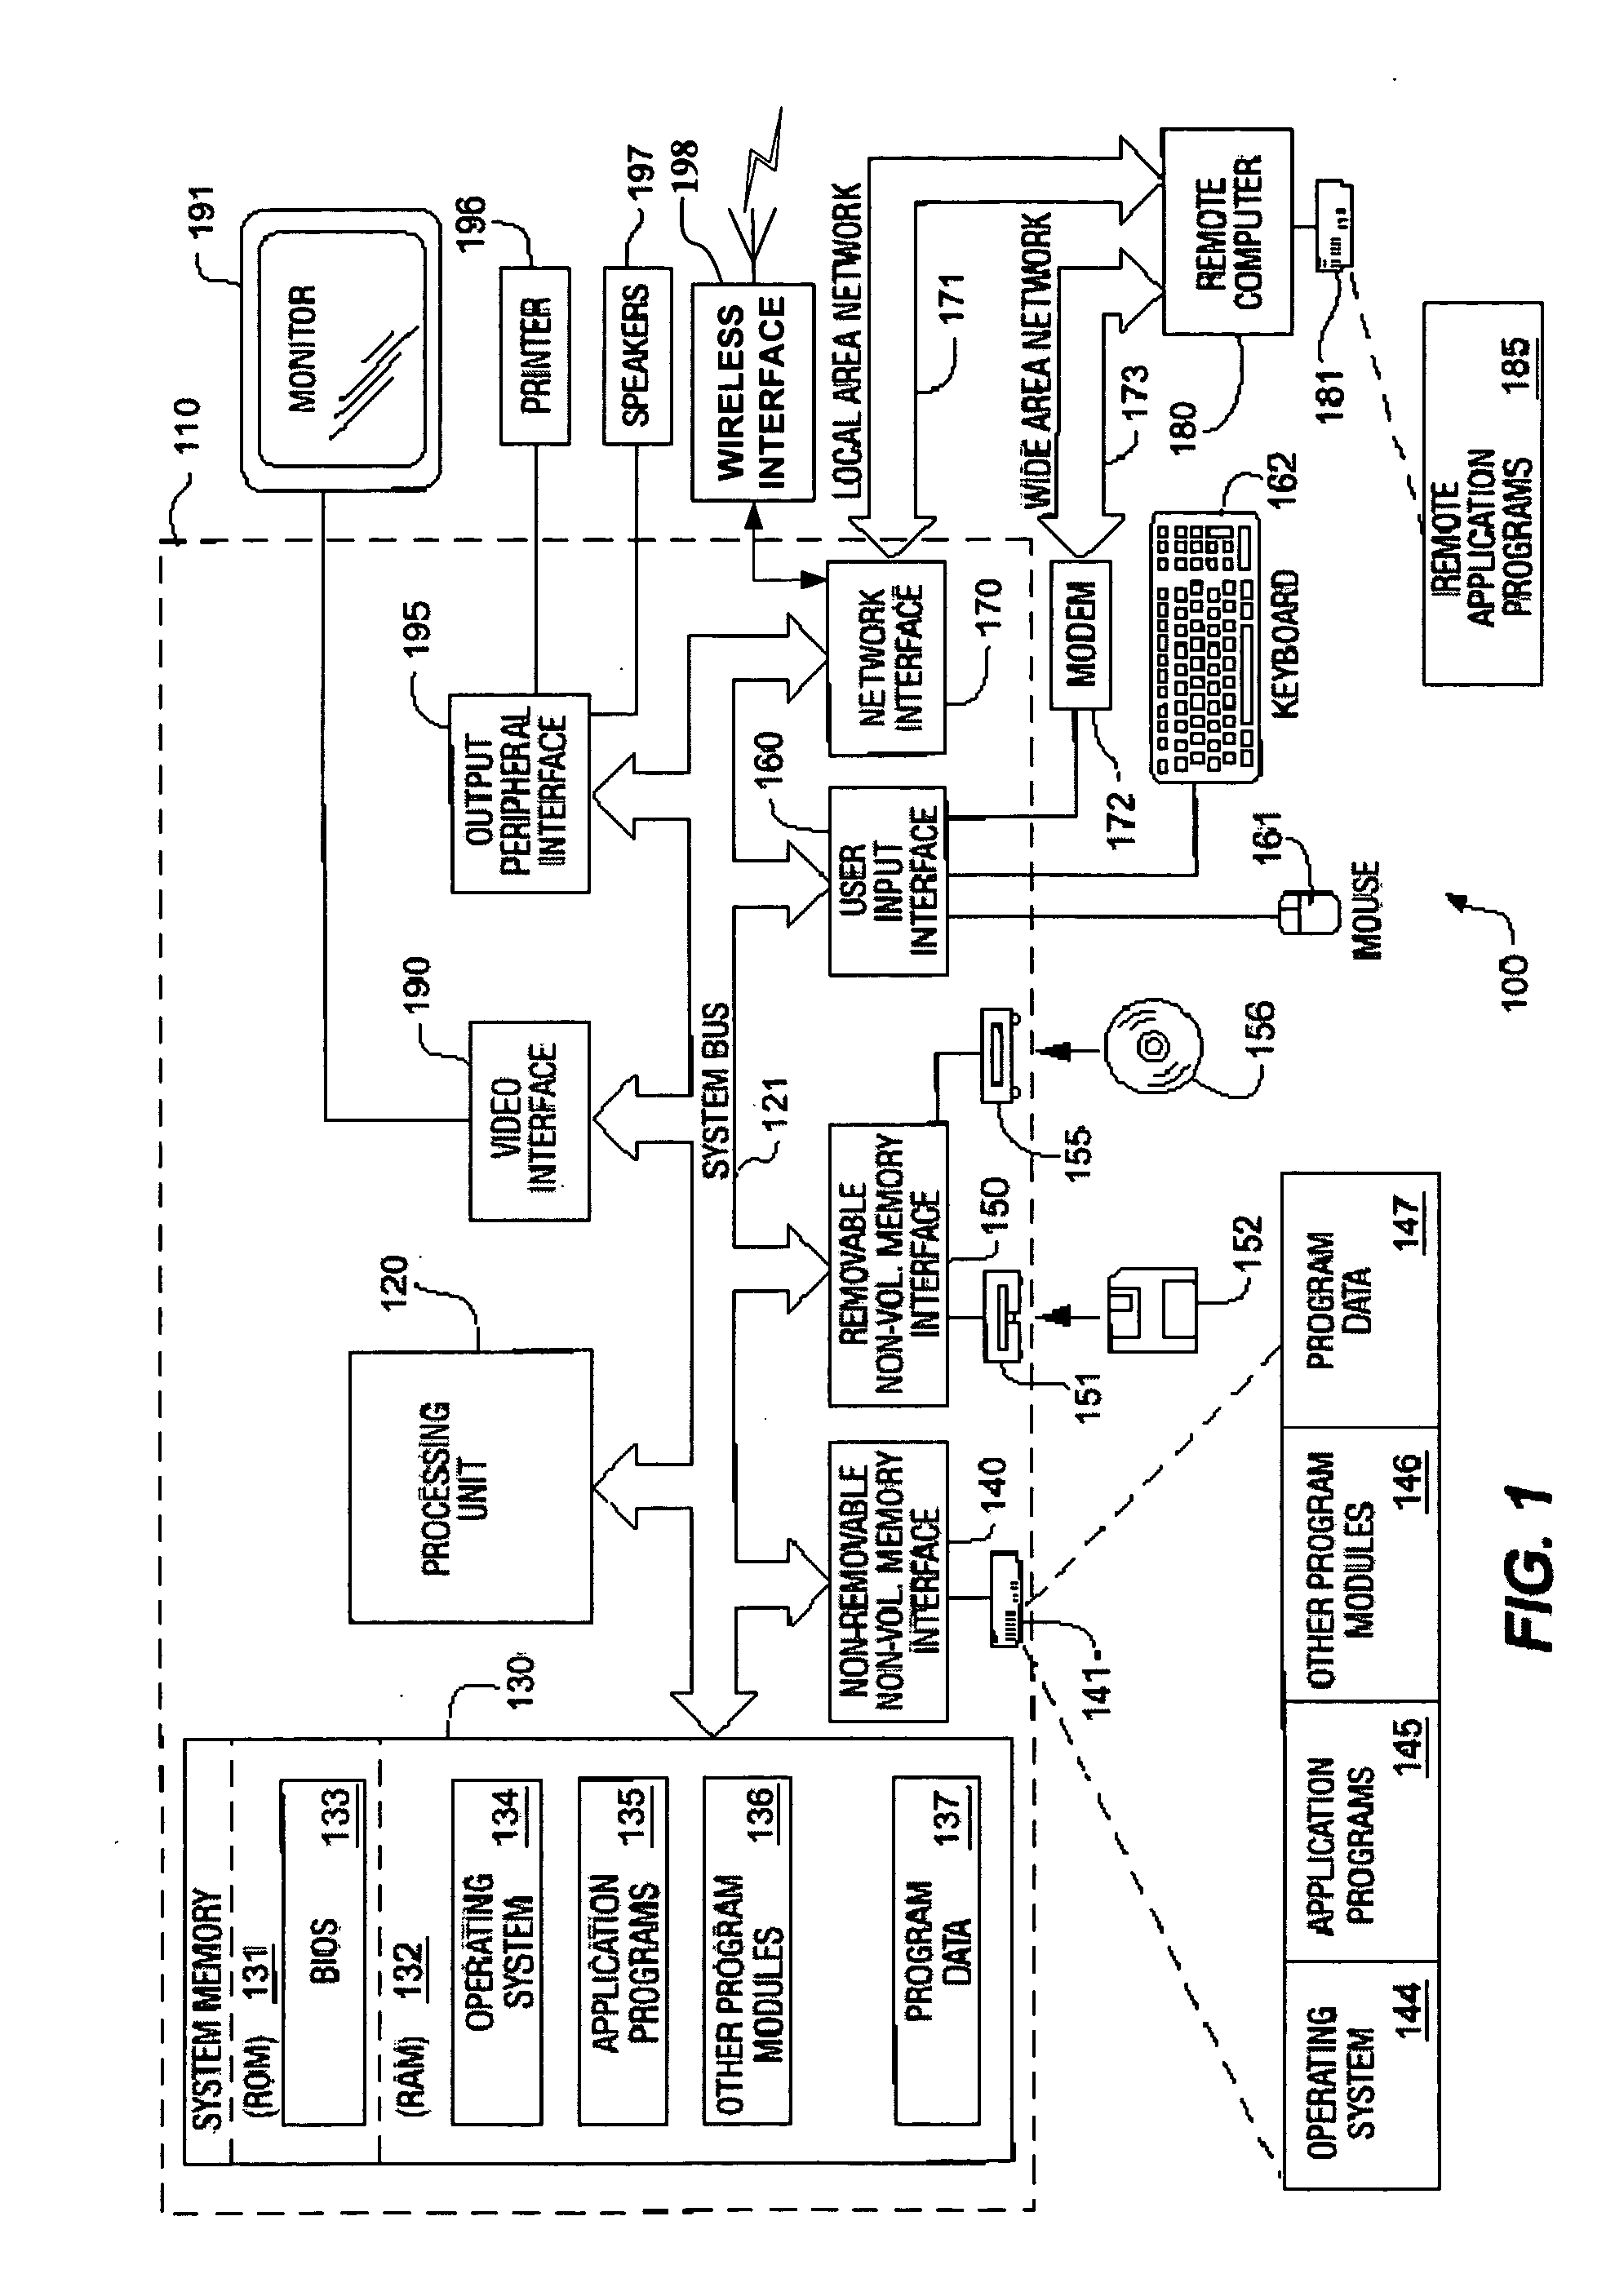 Extending access to a device in a limited connectivity network to devices residing outside the limited connectivity network